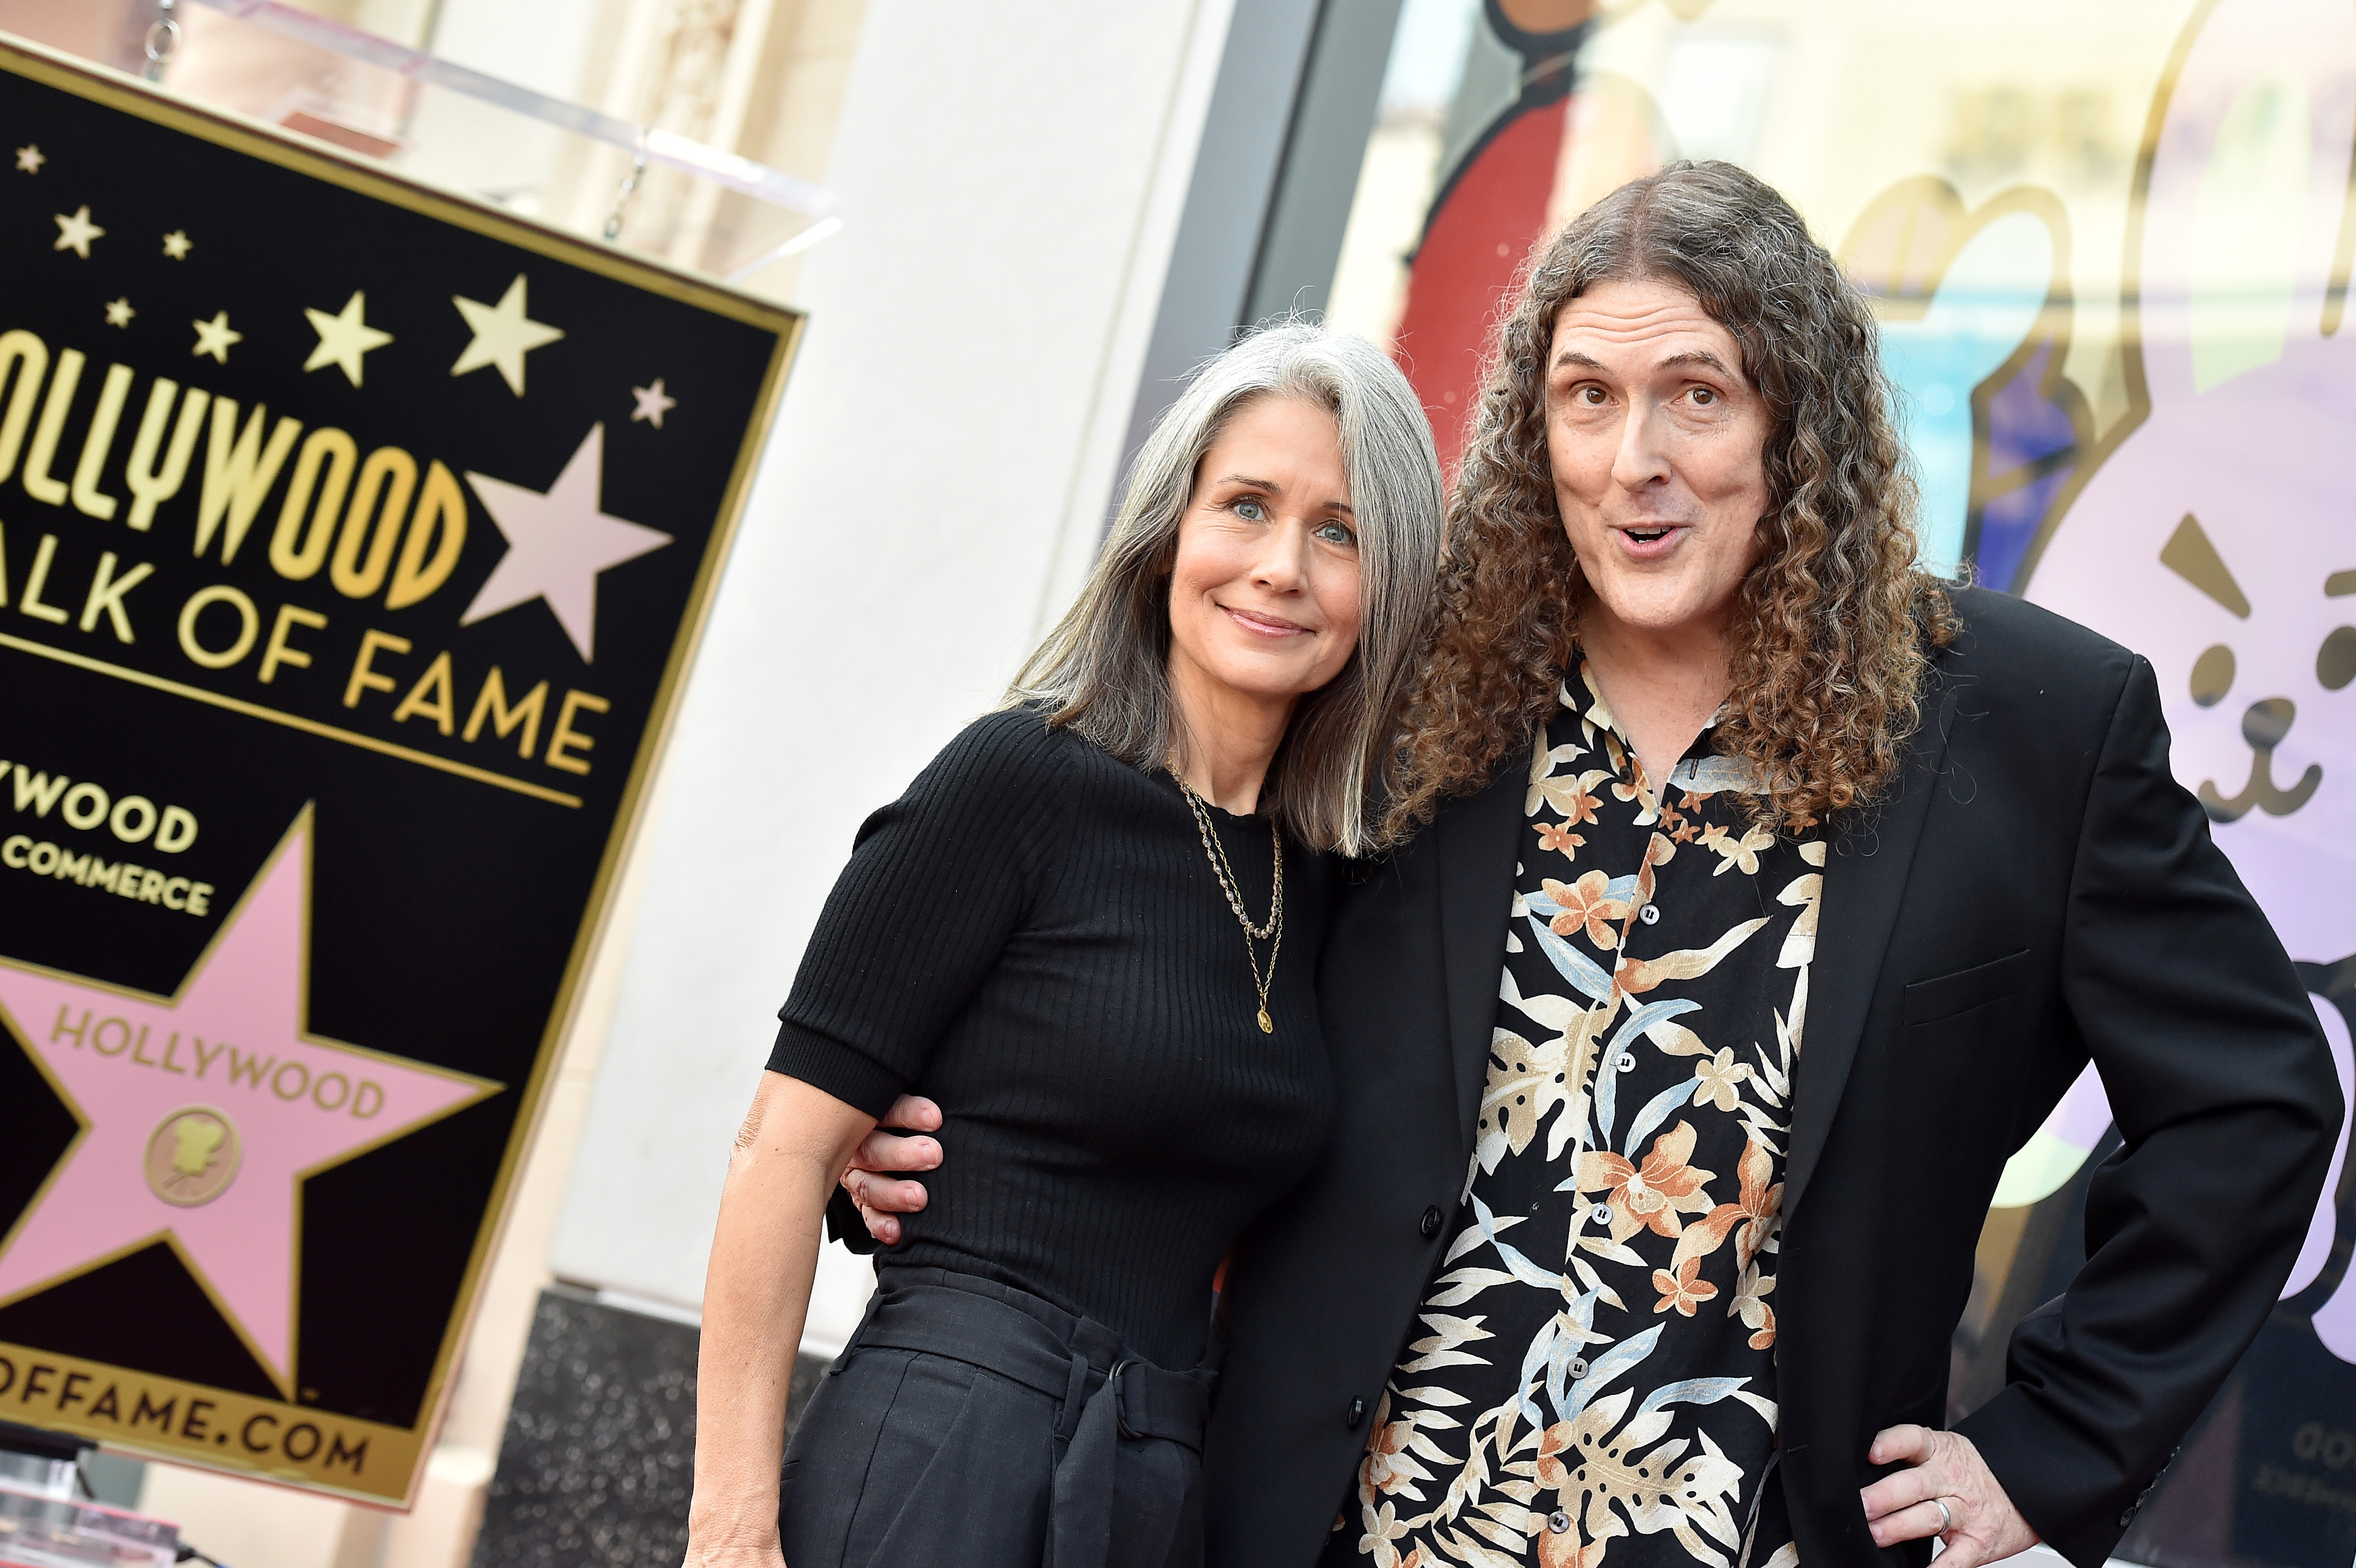 "Weird Al" Yankovic and Suzanne Yankovic on the Hollywood Walk of Fame on August 27, 2018, in Los Angeles, California. | Source: Getty Images